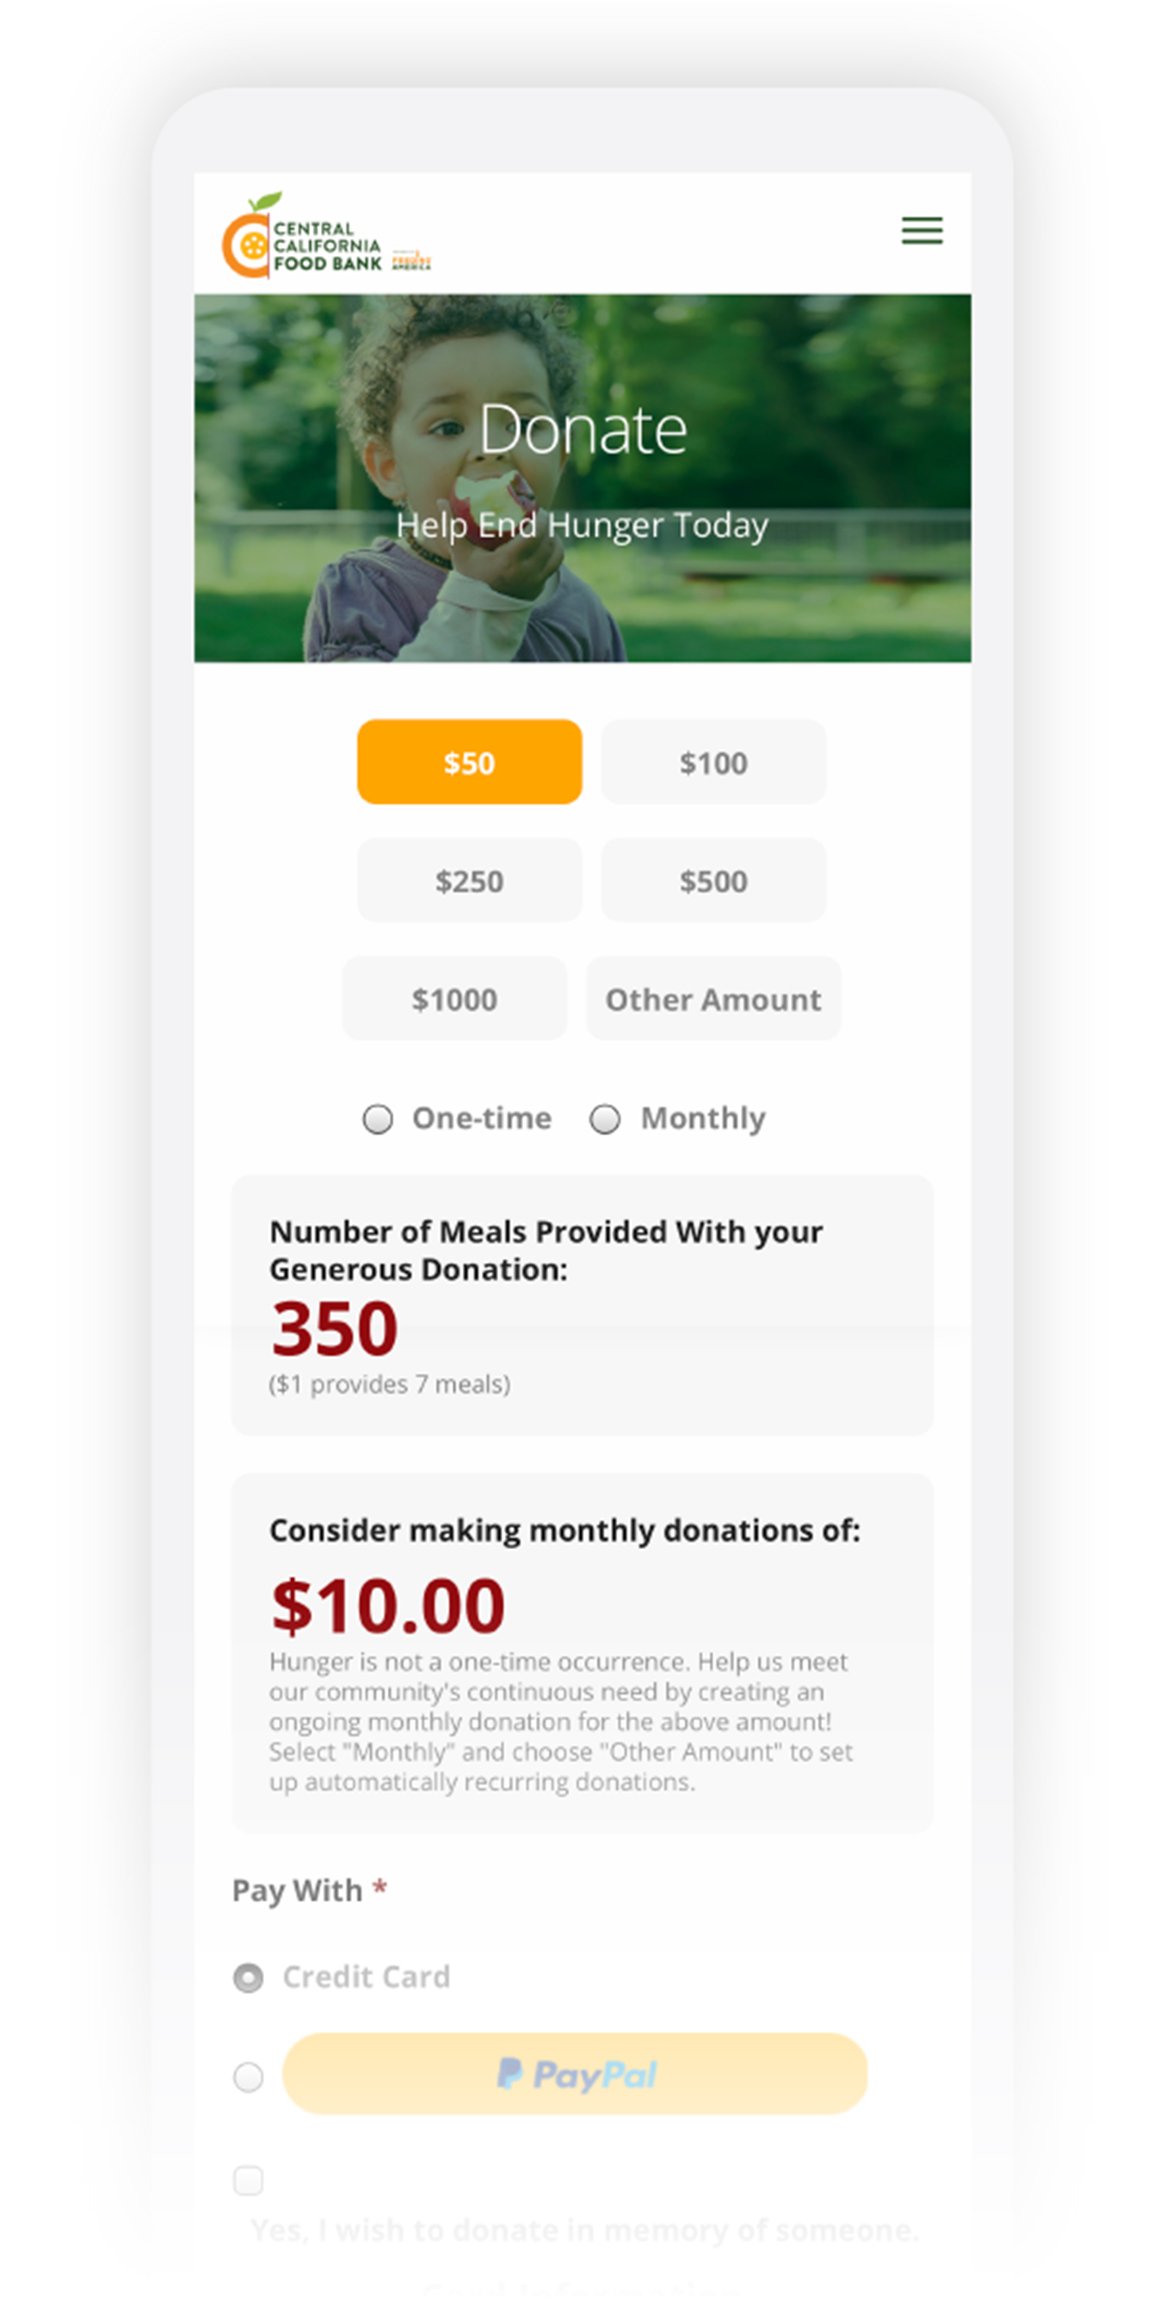 A smooth, easy to use donation experience for mobile users.